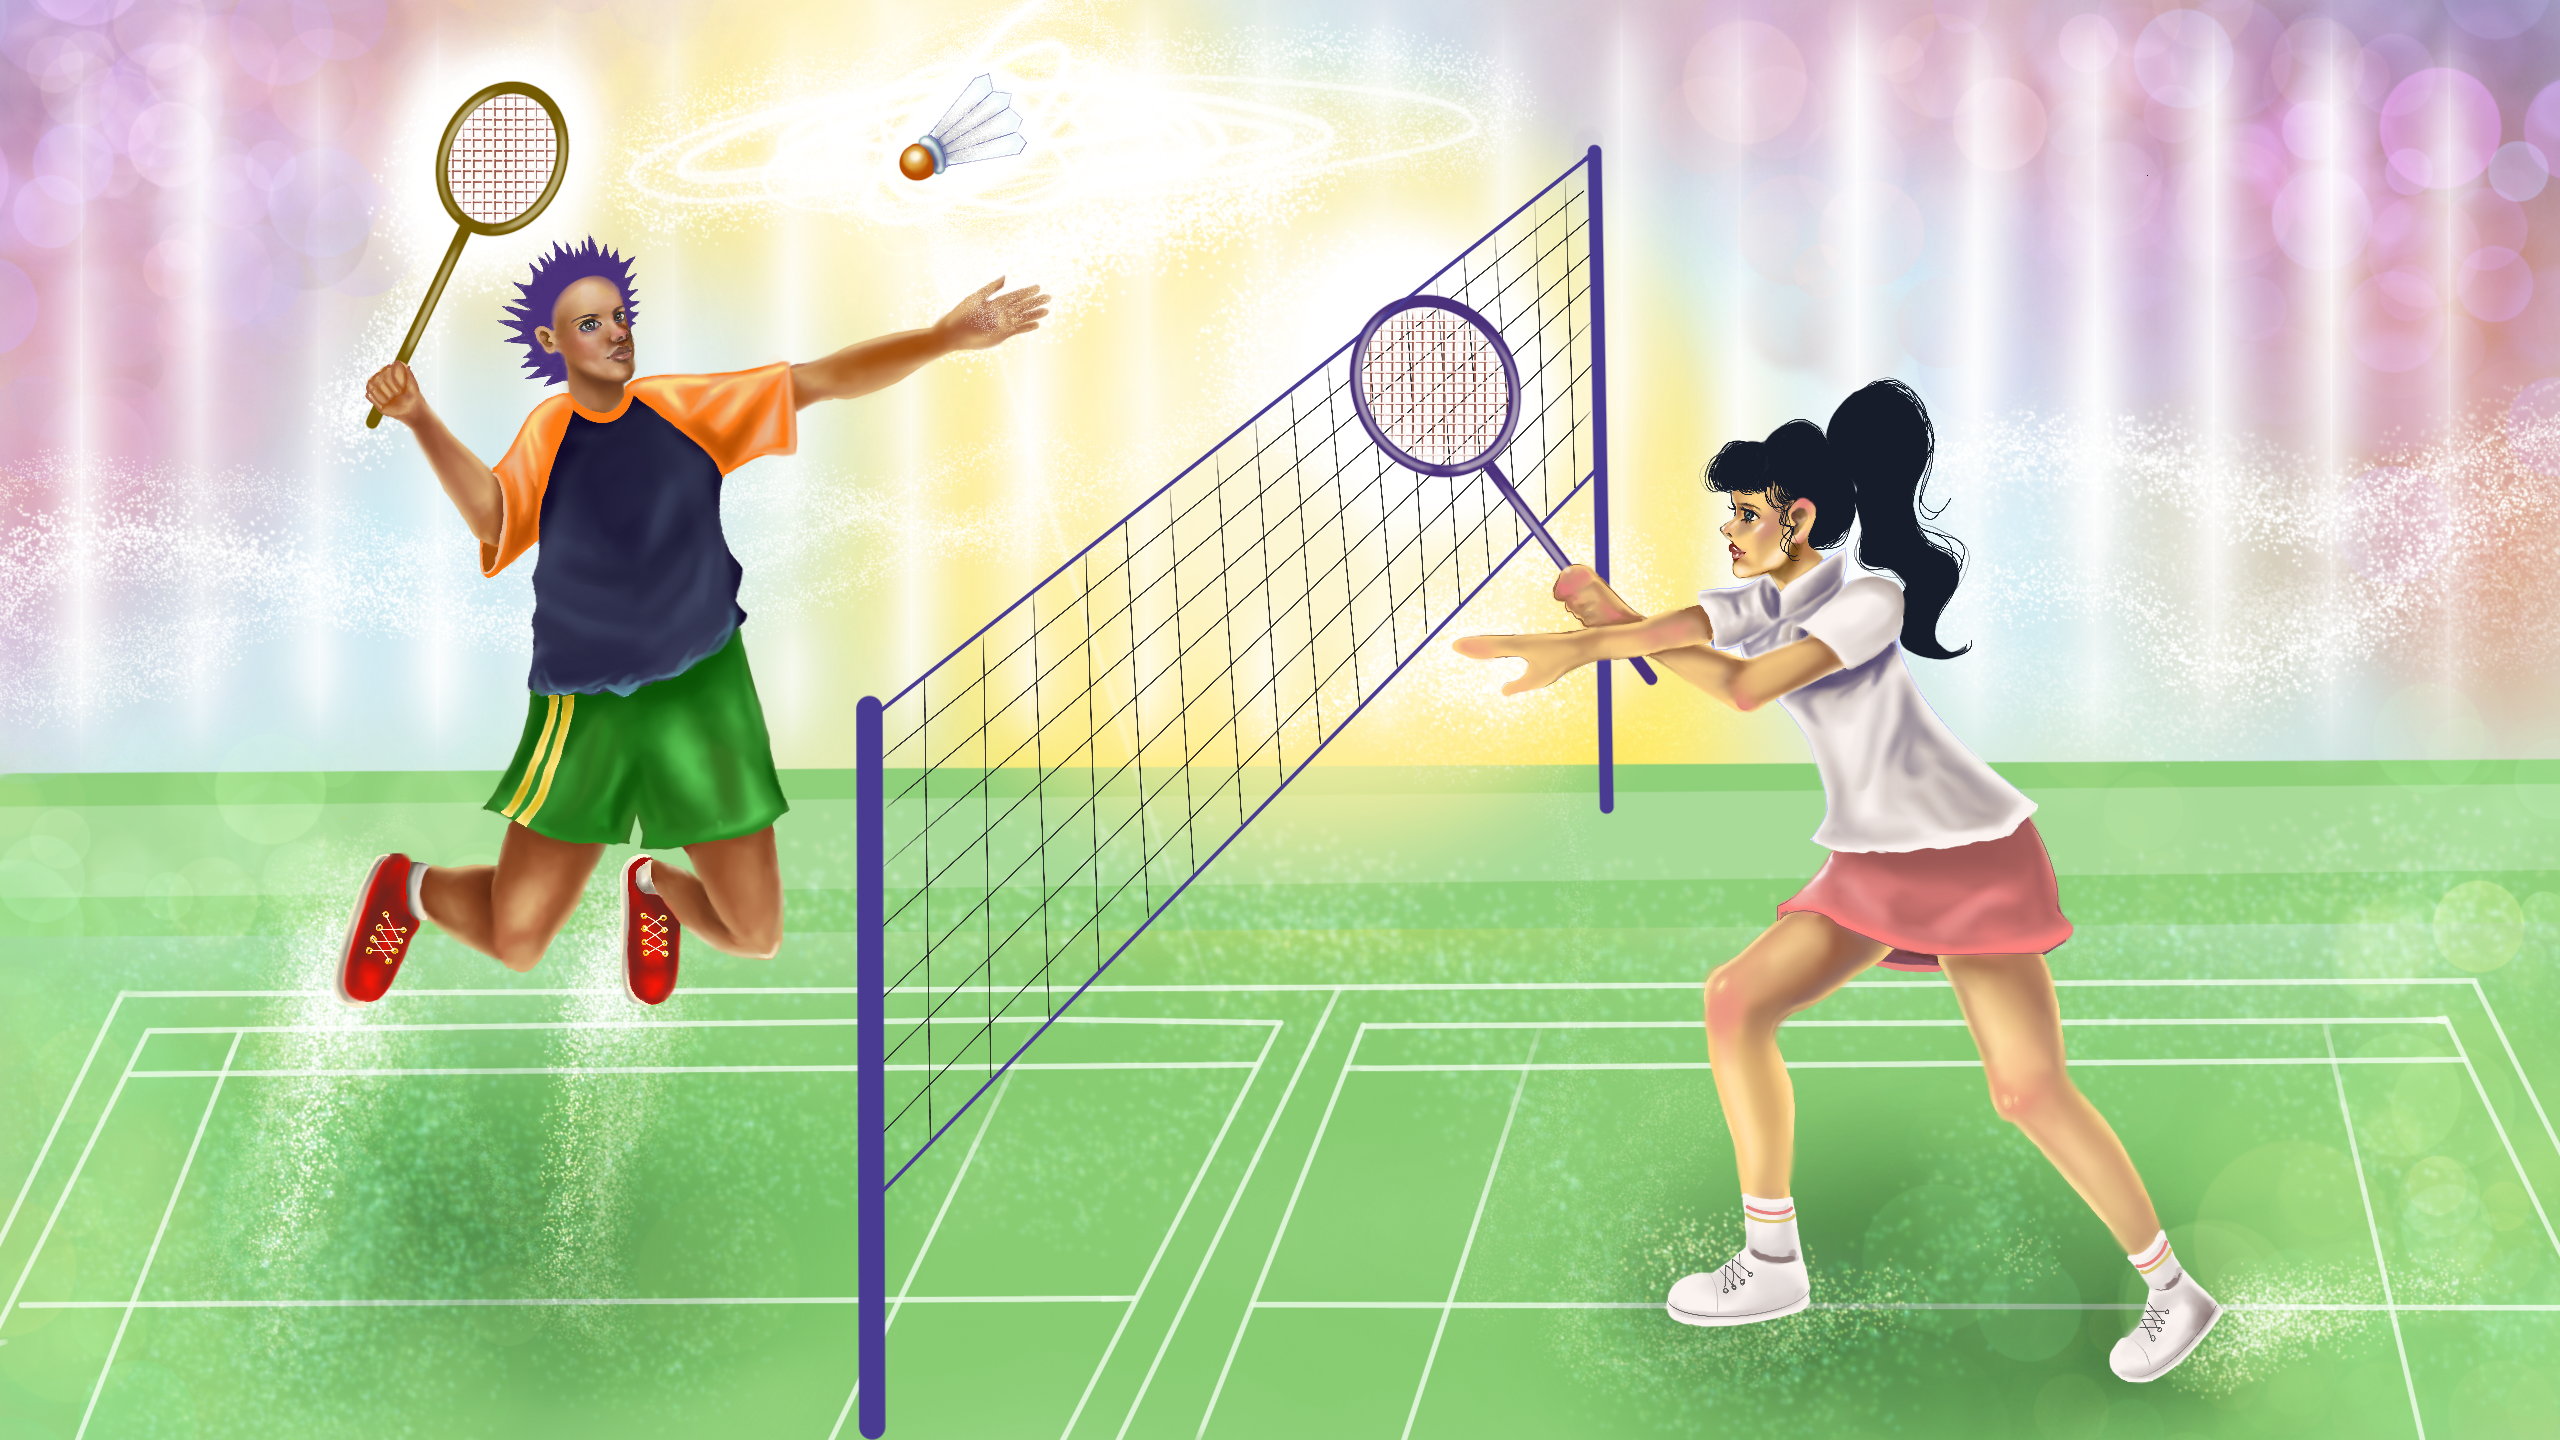 An illustration of two people playing badminton on a green court with a rainbow background